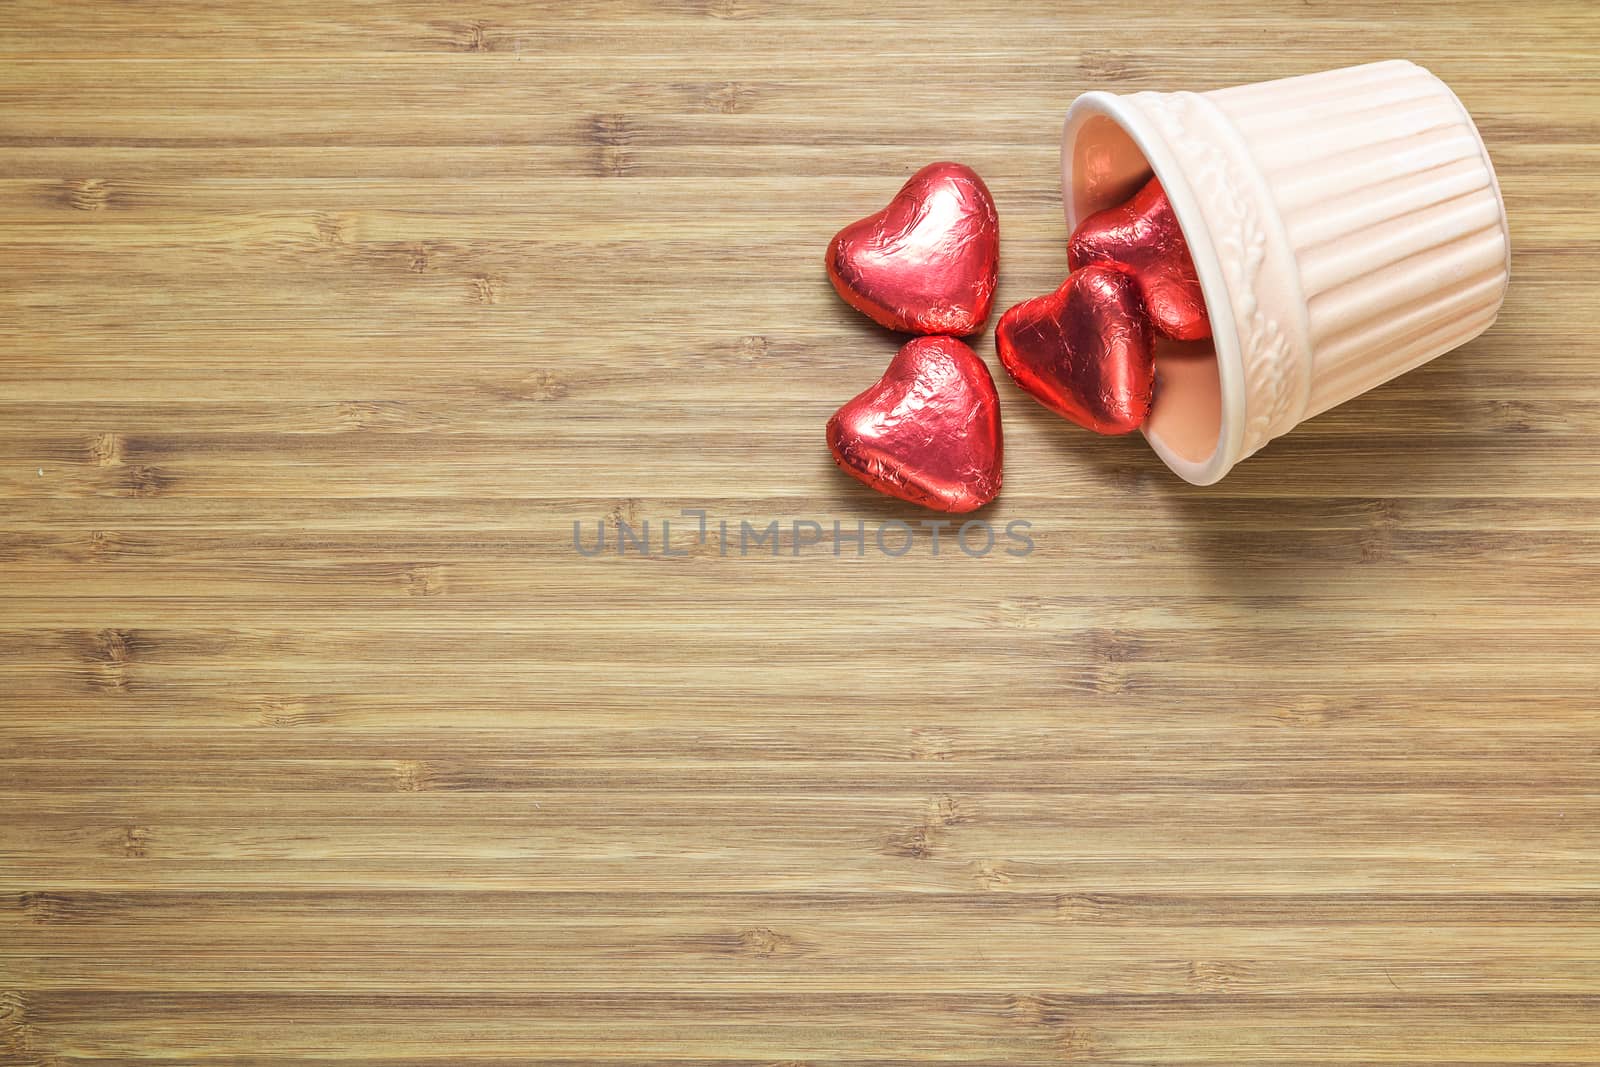 Heart shaped sweets wrapped in a bright red foil lying in a ceramic vase on a wooden texture. Background for romantic themes.